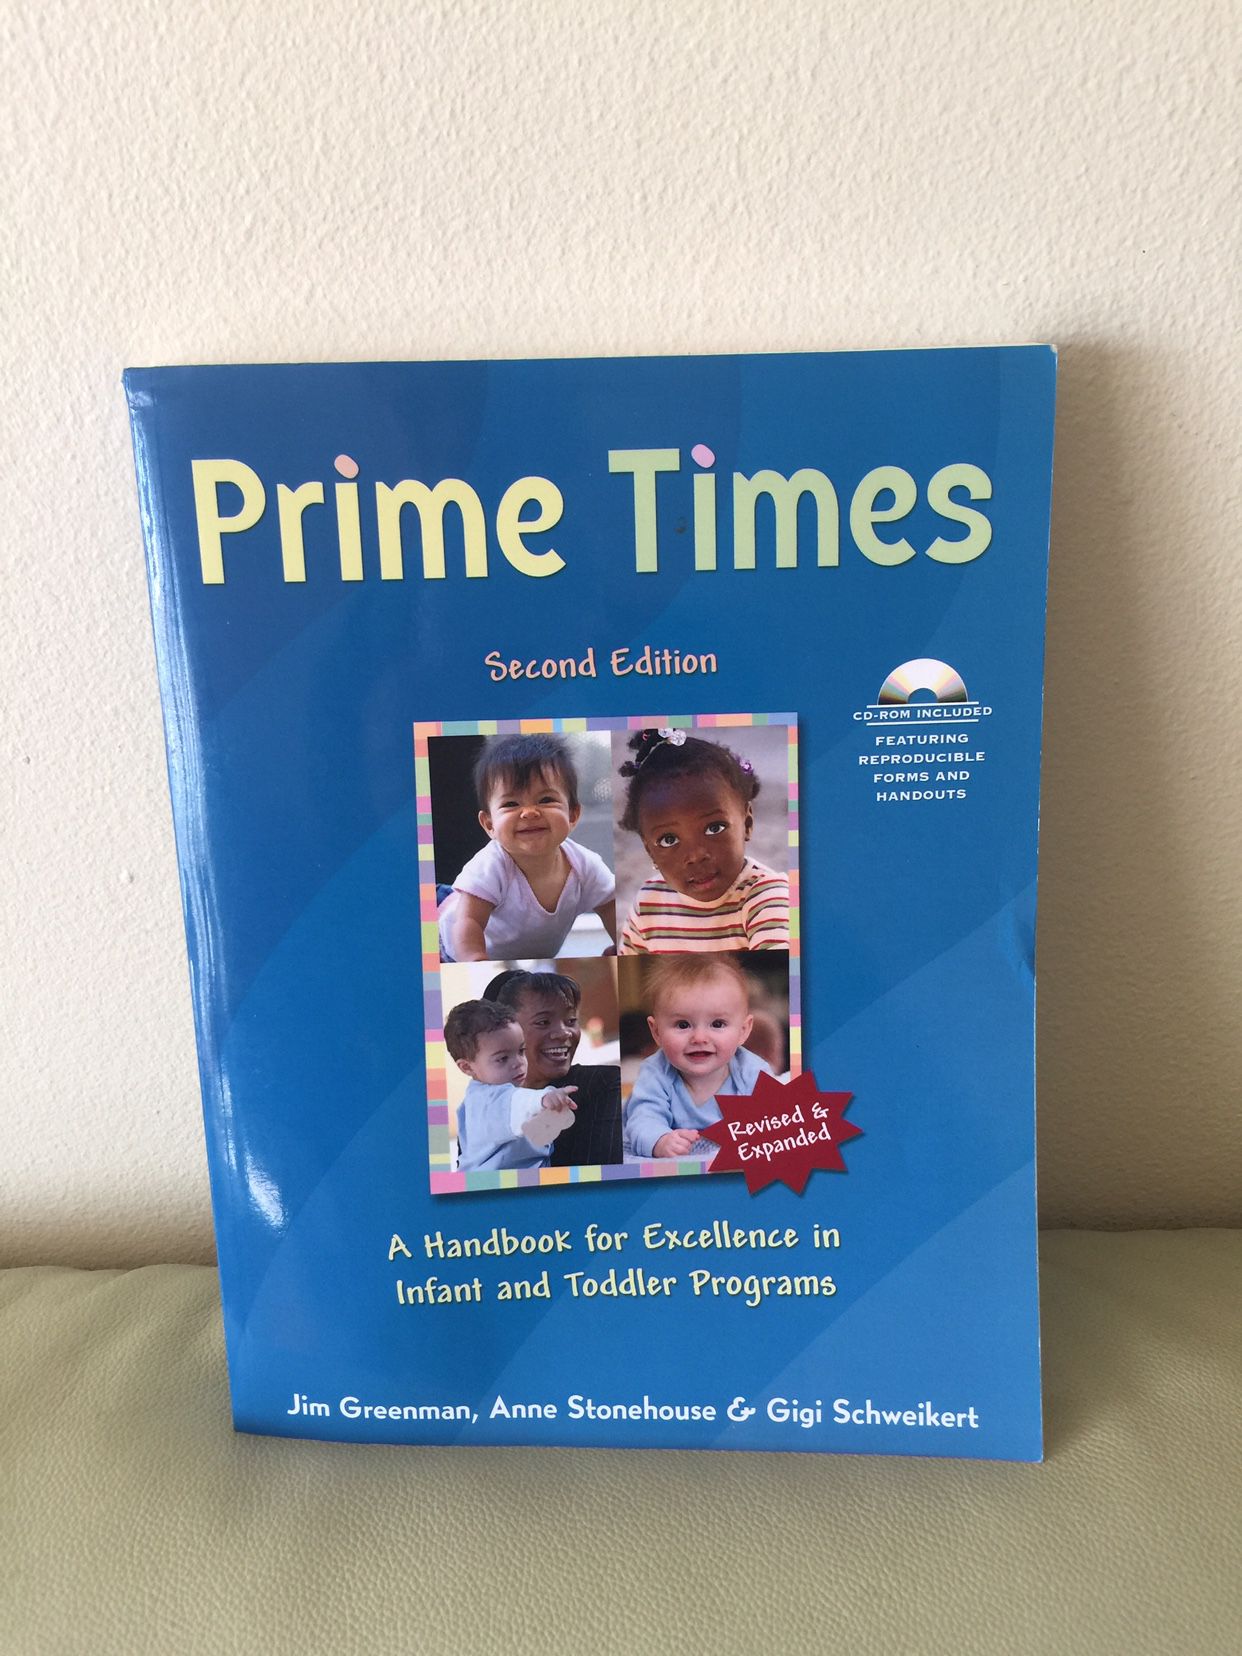 Prime Times Second Edition (A Handbook for Excellence In Infant And Toddler Programs